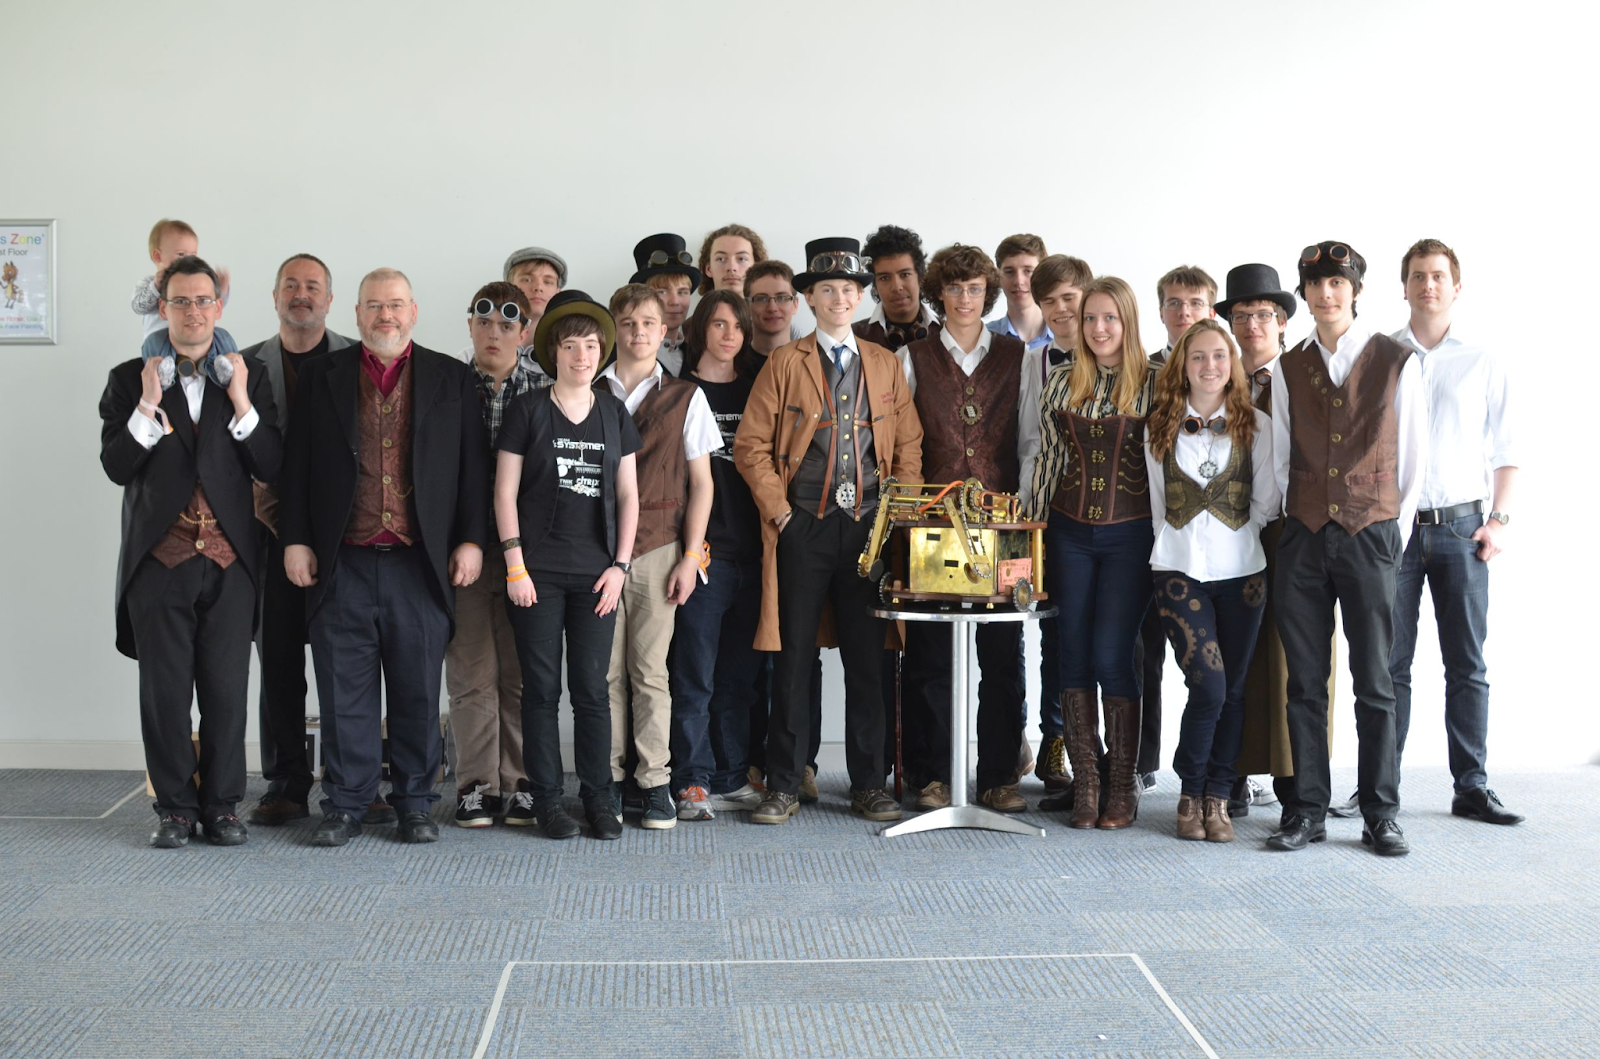 2014 - HRS: Systemetric (HRS) impressed the judges with their steampunk
costumes and brass and mahogany robot (pictured).